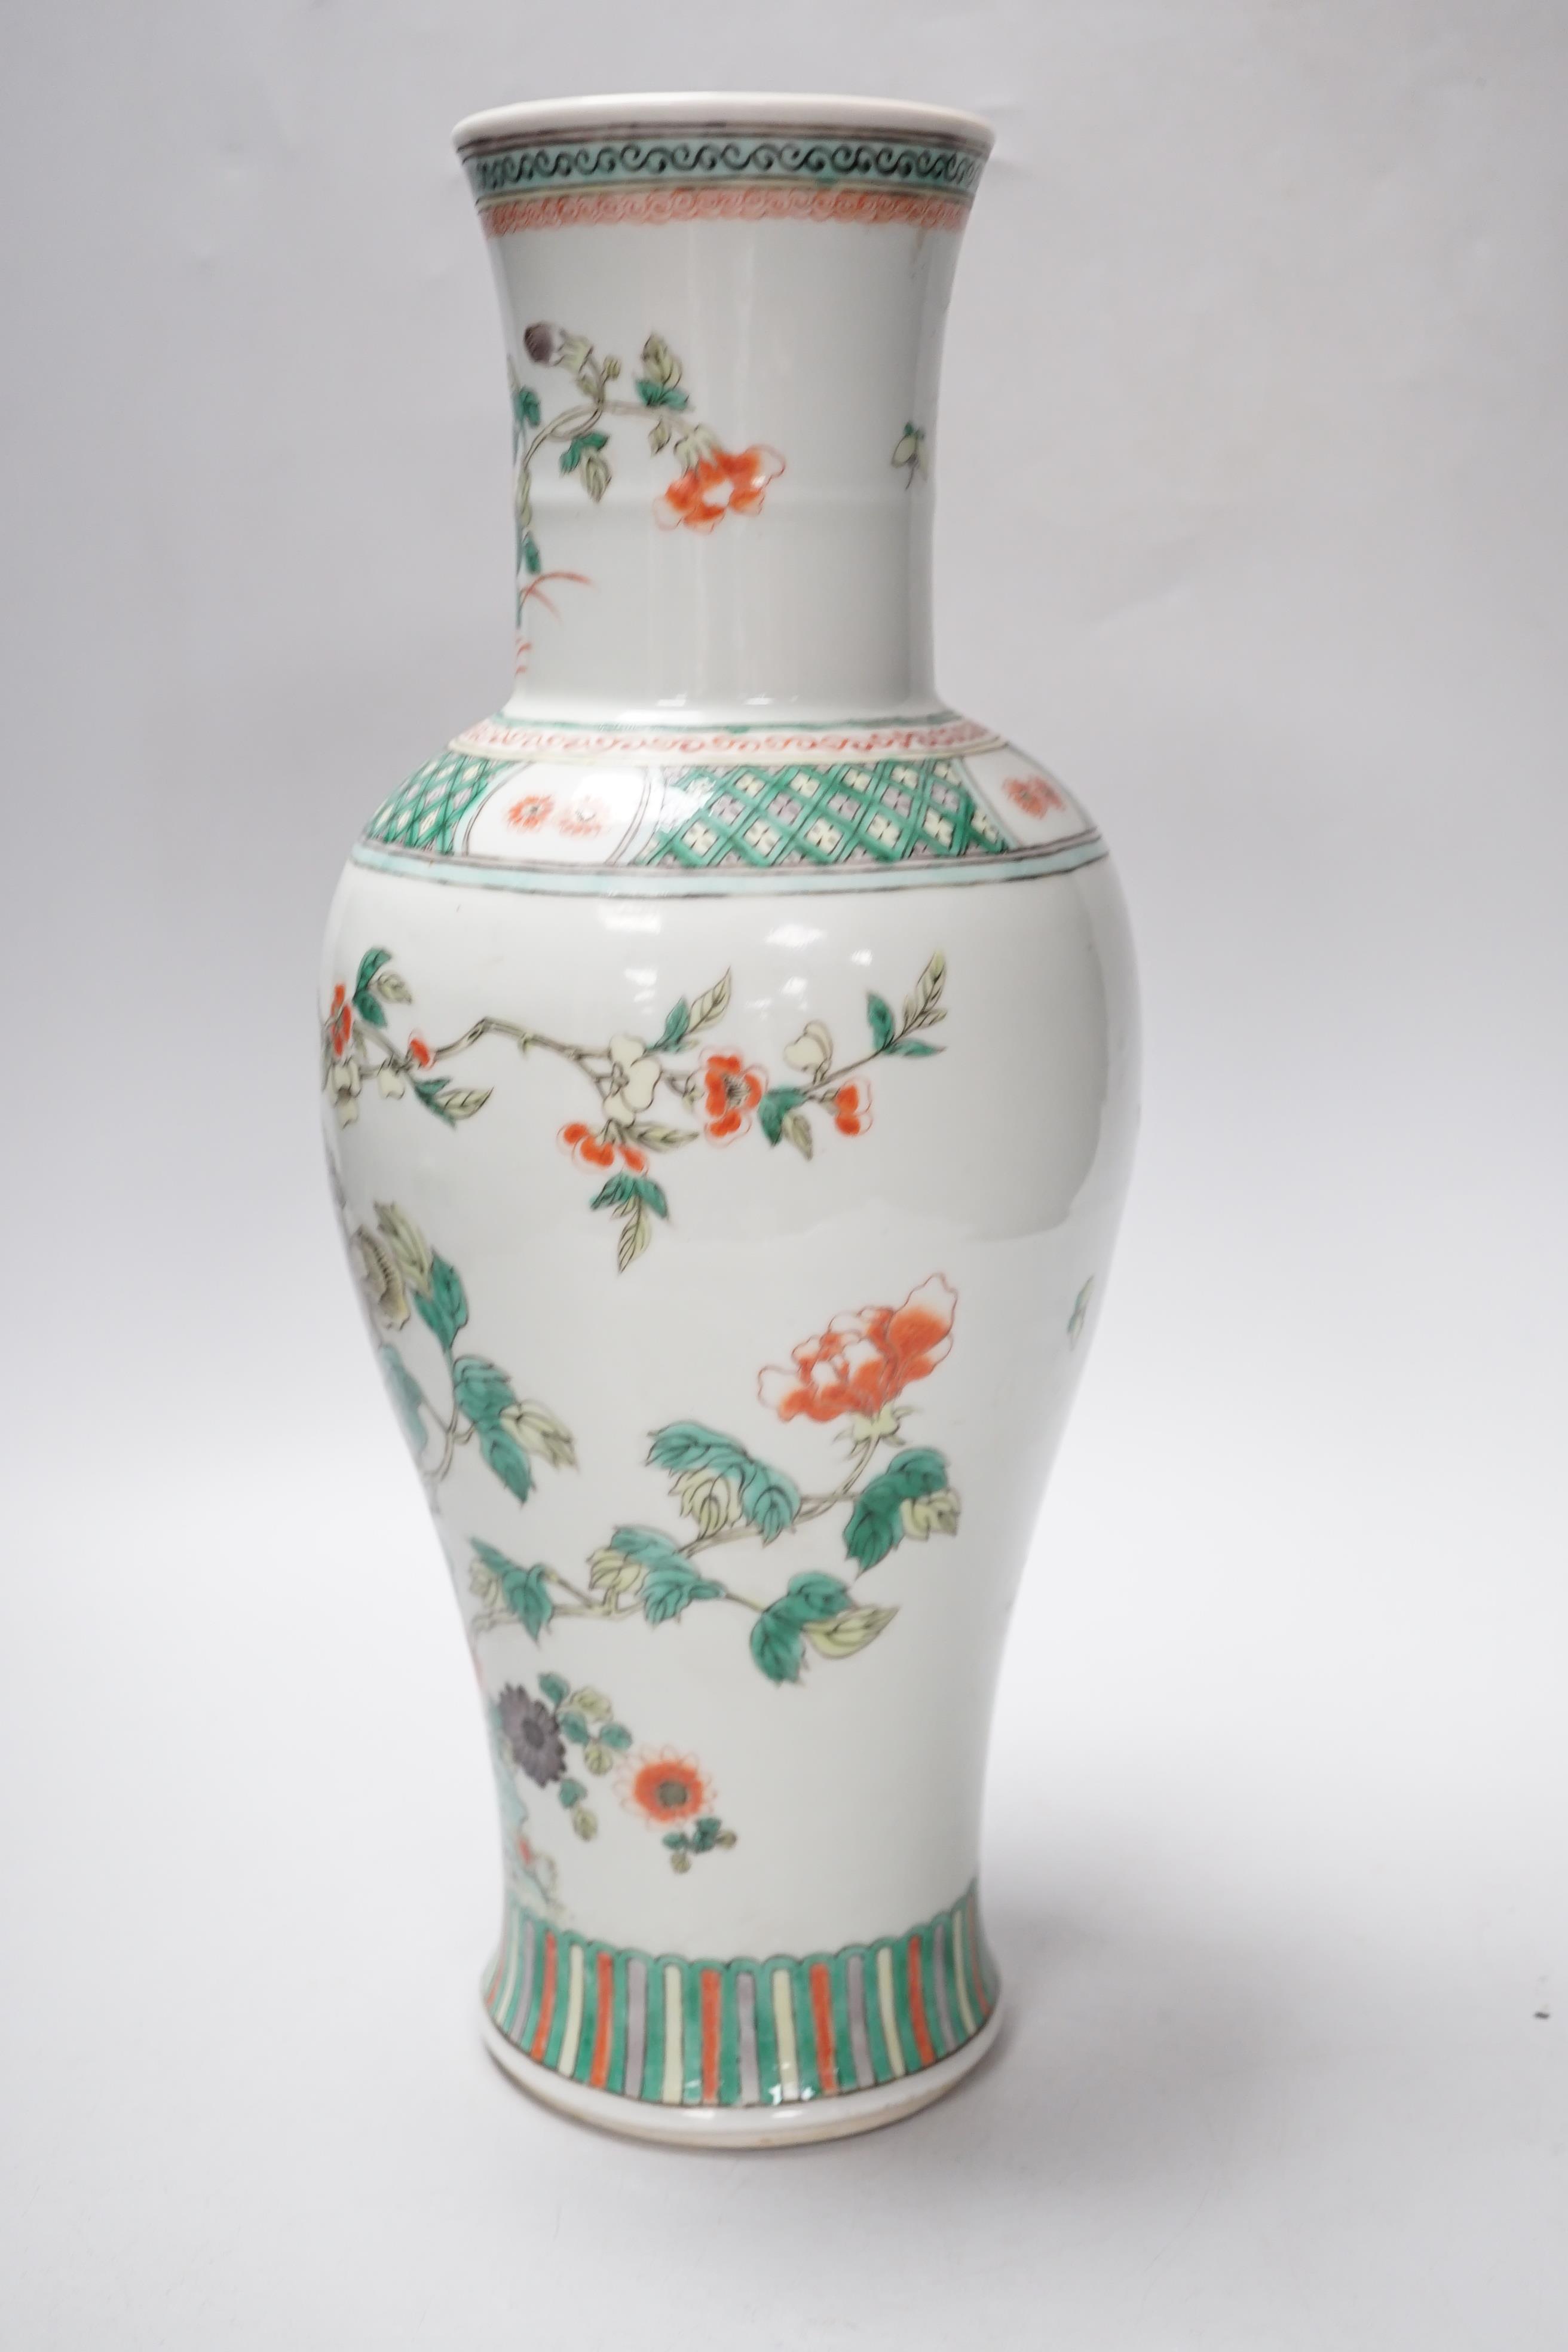 A Chinese famille verte baluster vase, late 19th/early 20th century, 35.5cm high